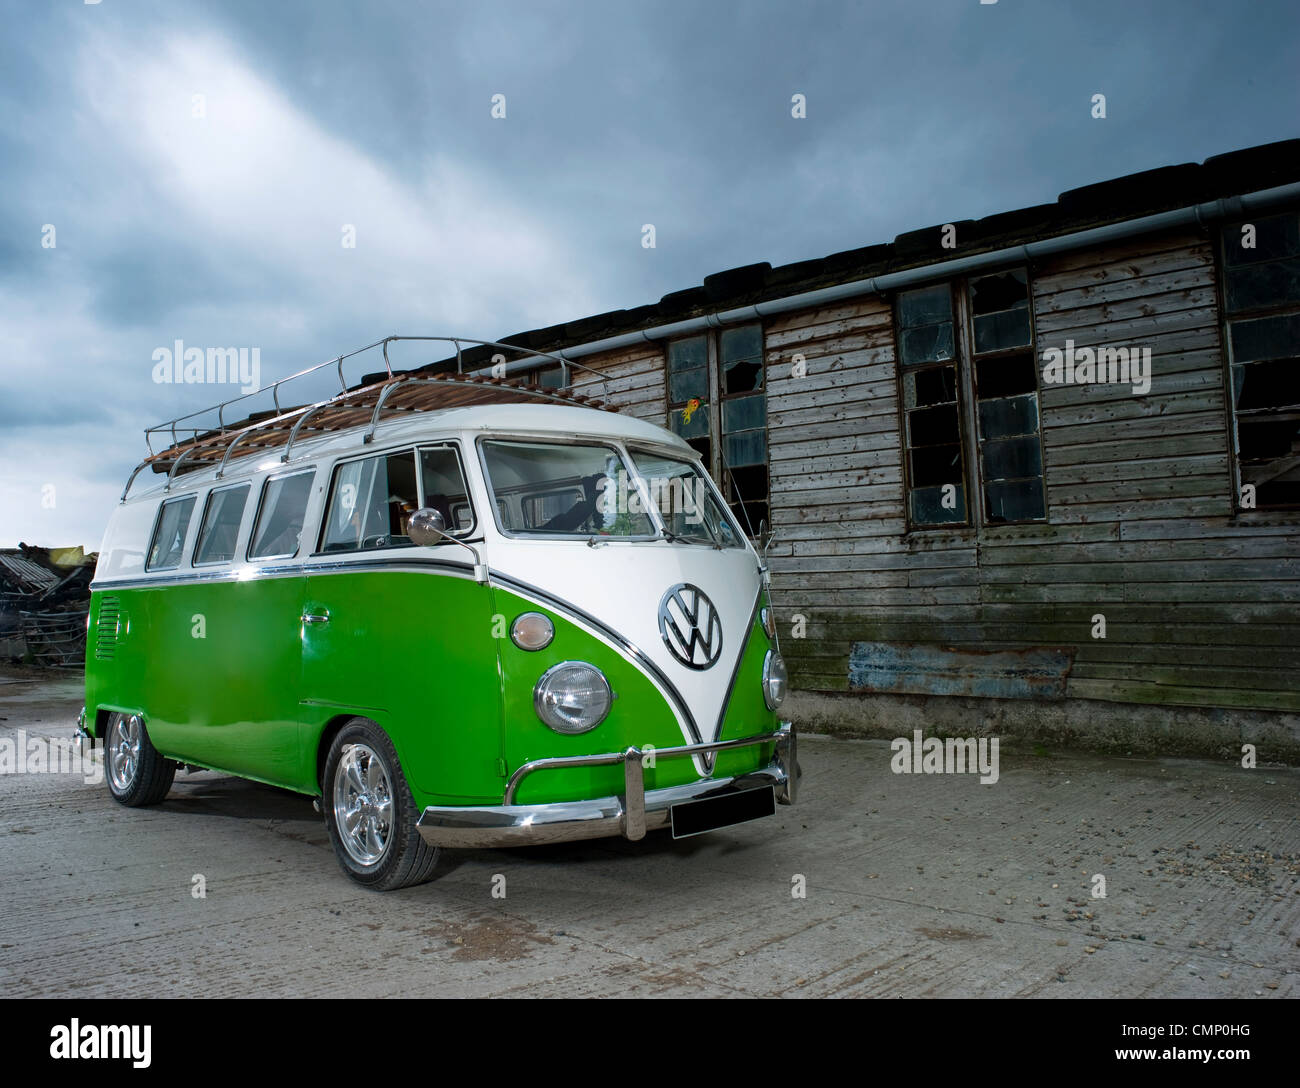 green vw volkswagen split screen camper van bus lowered modified pimped lime hippie hippy 1960s 1950s aircooled retro Stock Photo